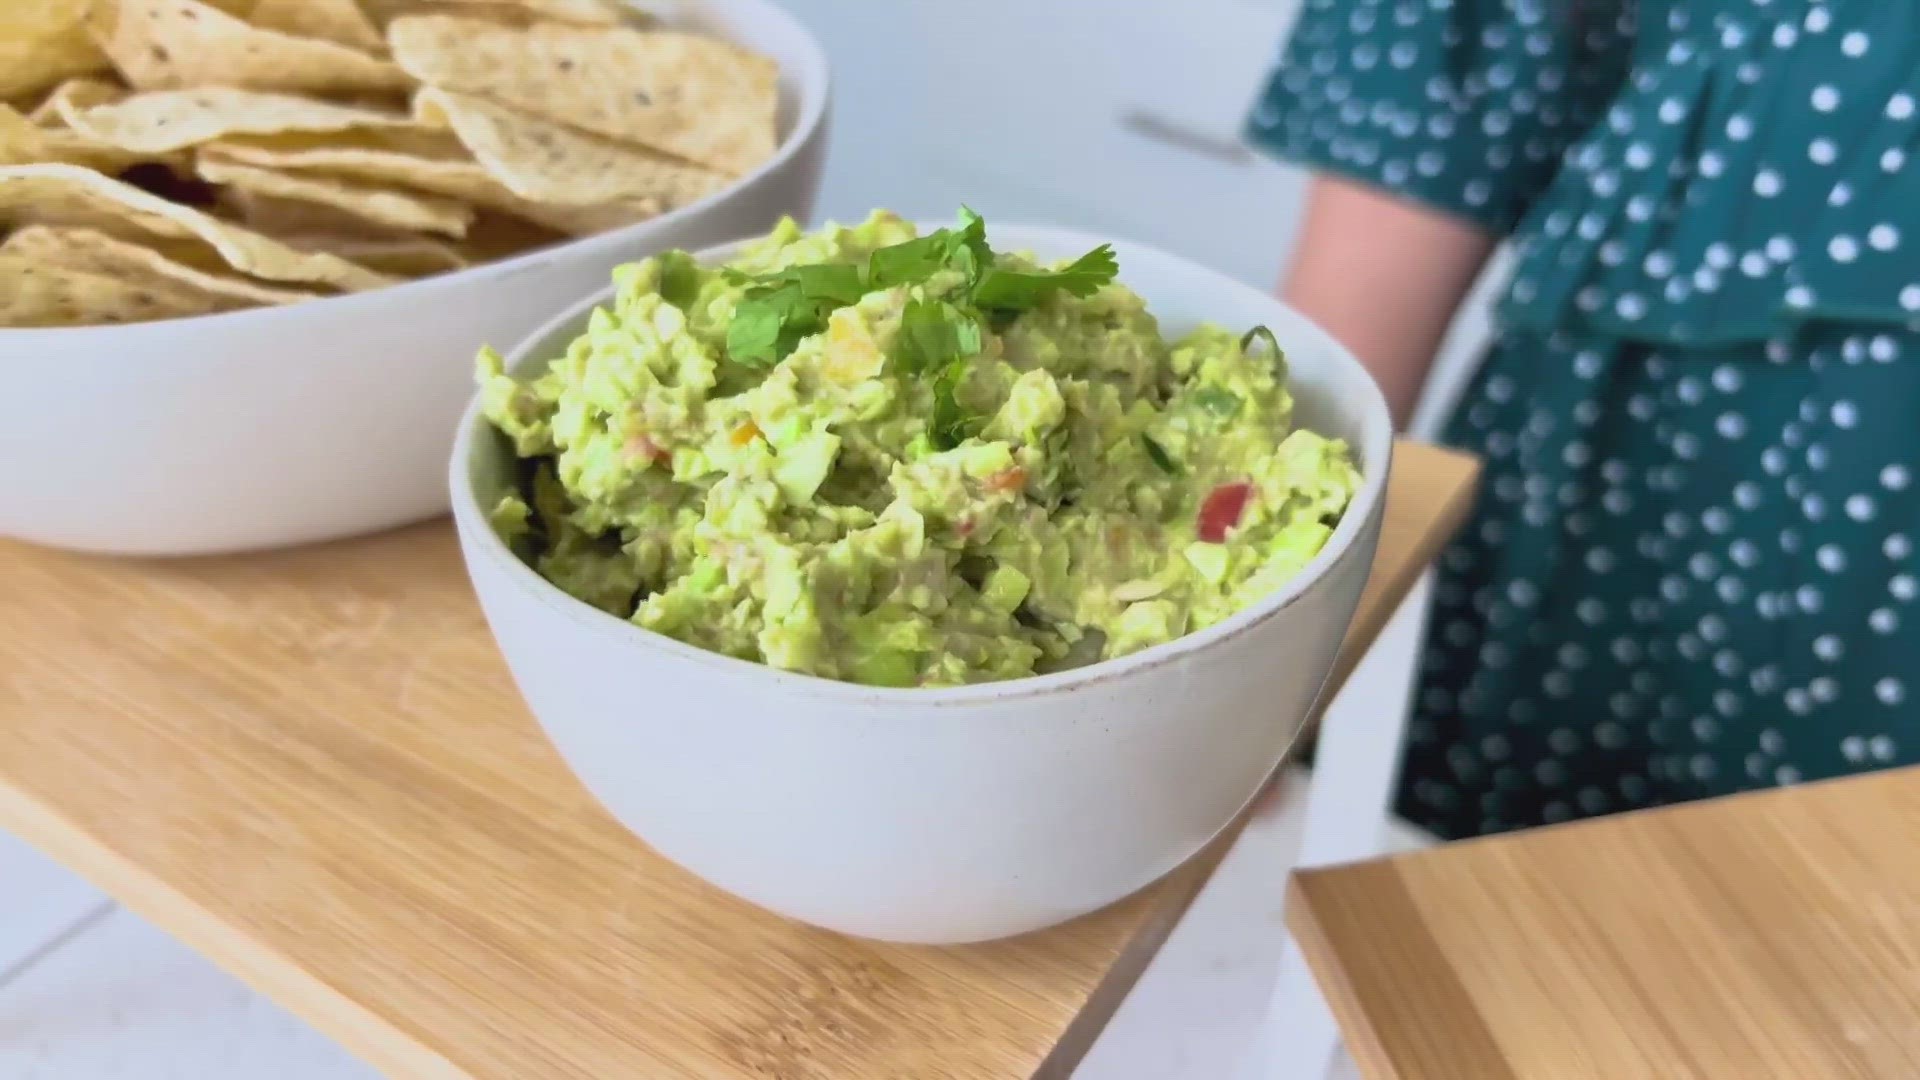 This extra ingredient to add to your guac is a great source of fiber, folate, iron, calcium and adds about 17 grams of protein per cup.